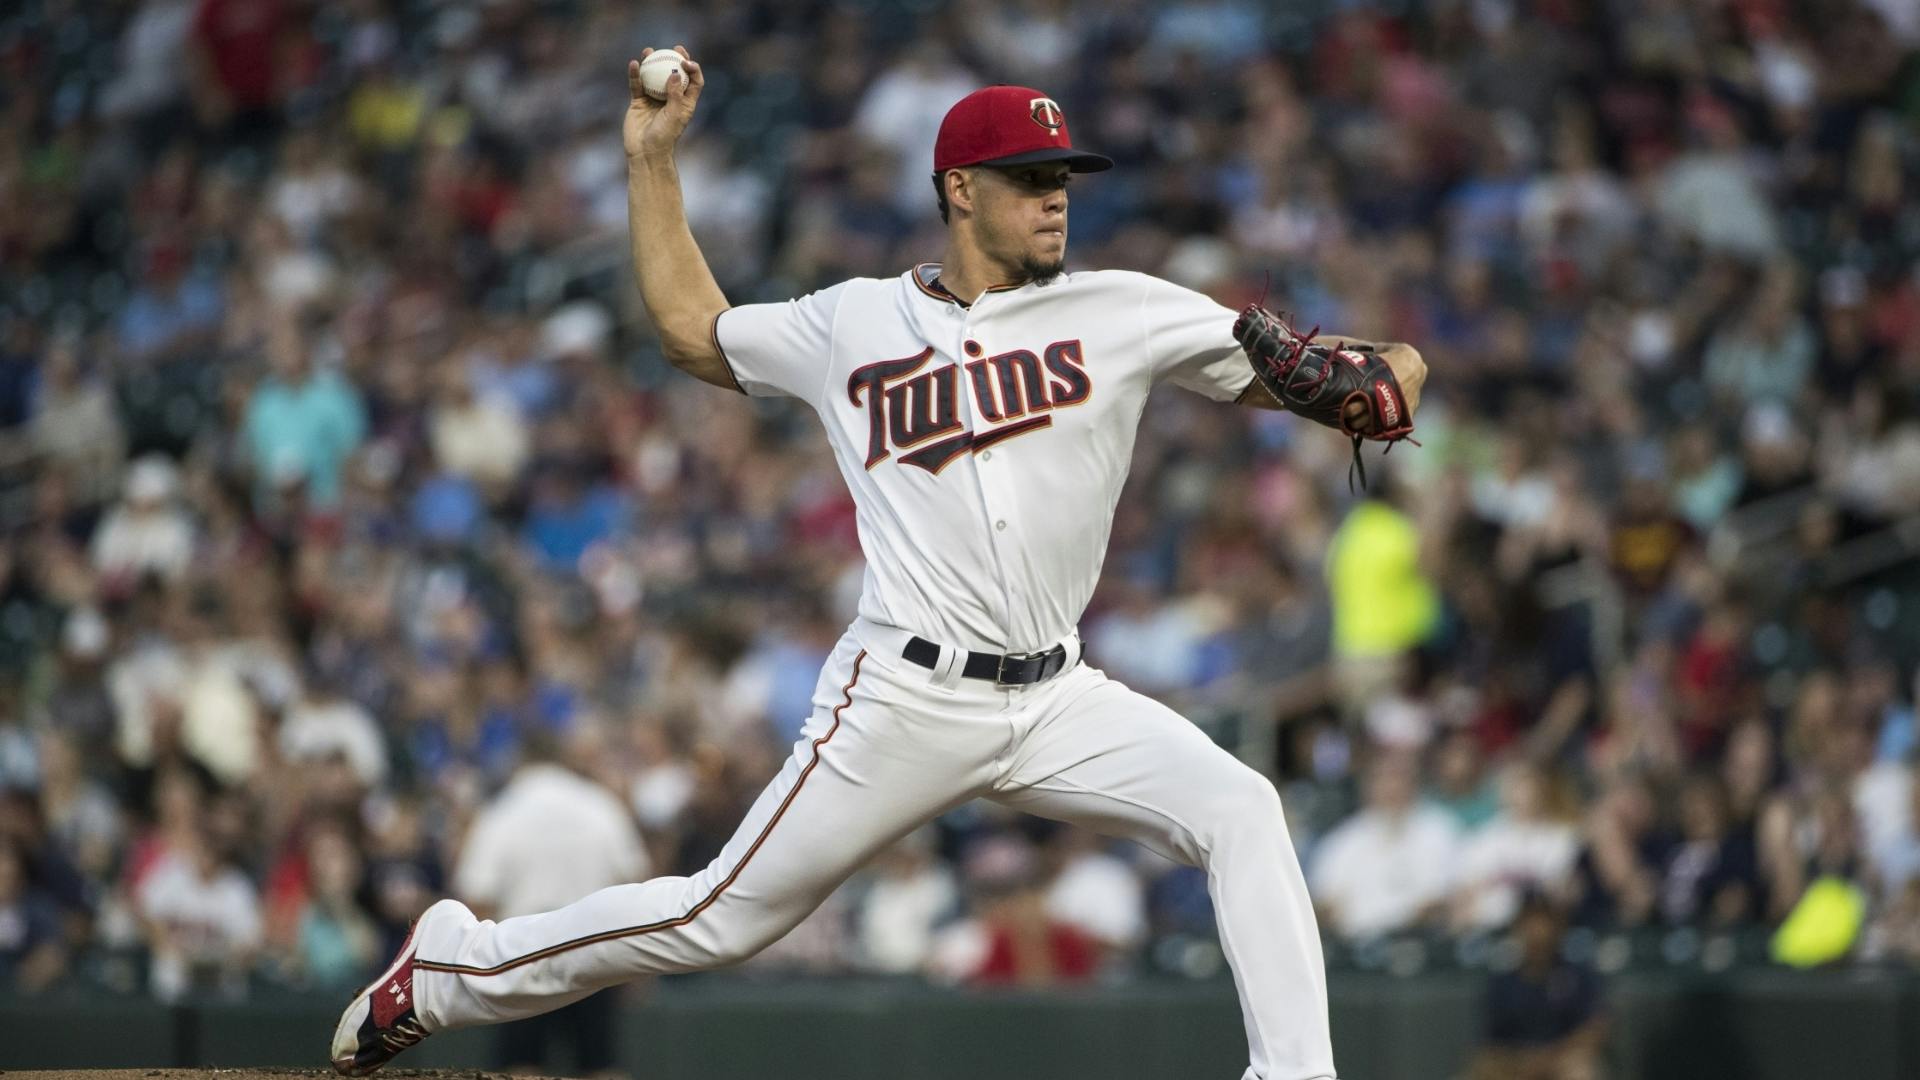 Twins starter Jose Berrios kept Thursday's game close and was rewarded when the Twins won in 10 innings